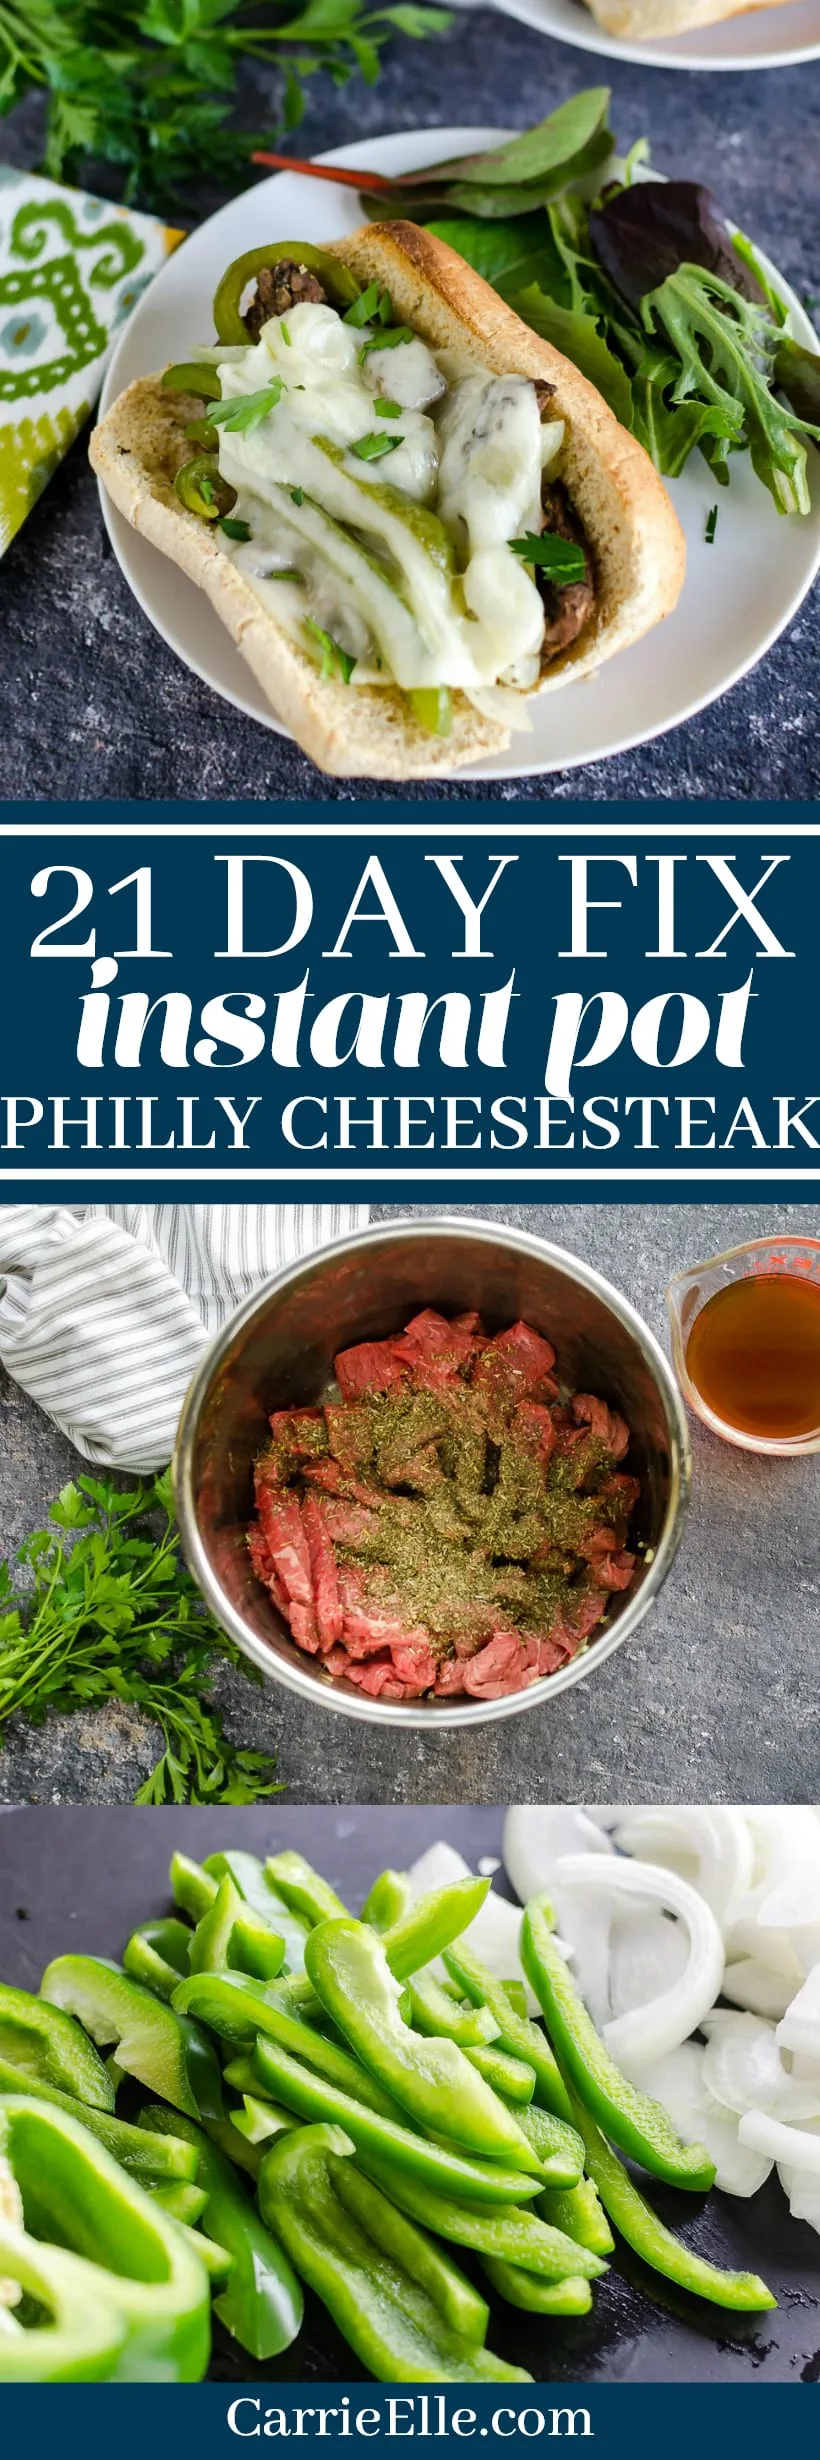 21 Day Fix Instant Pot Philly Cheesesteak